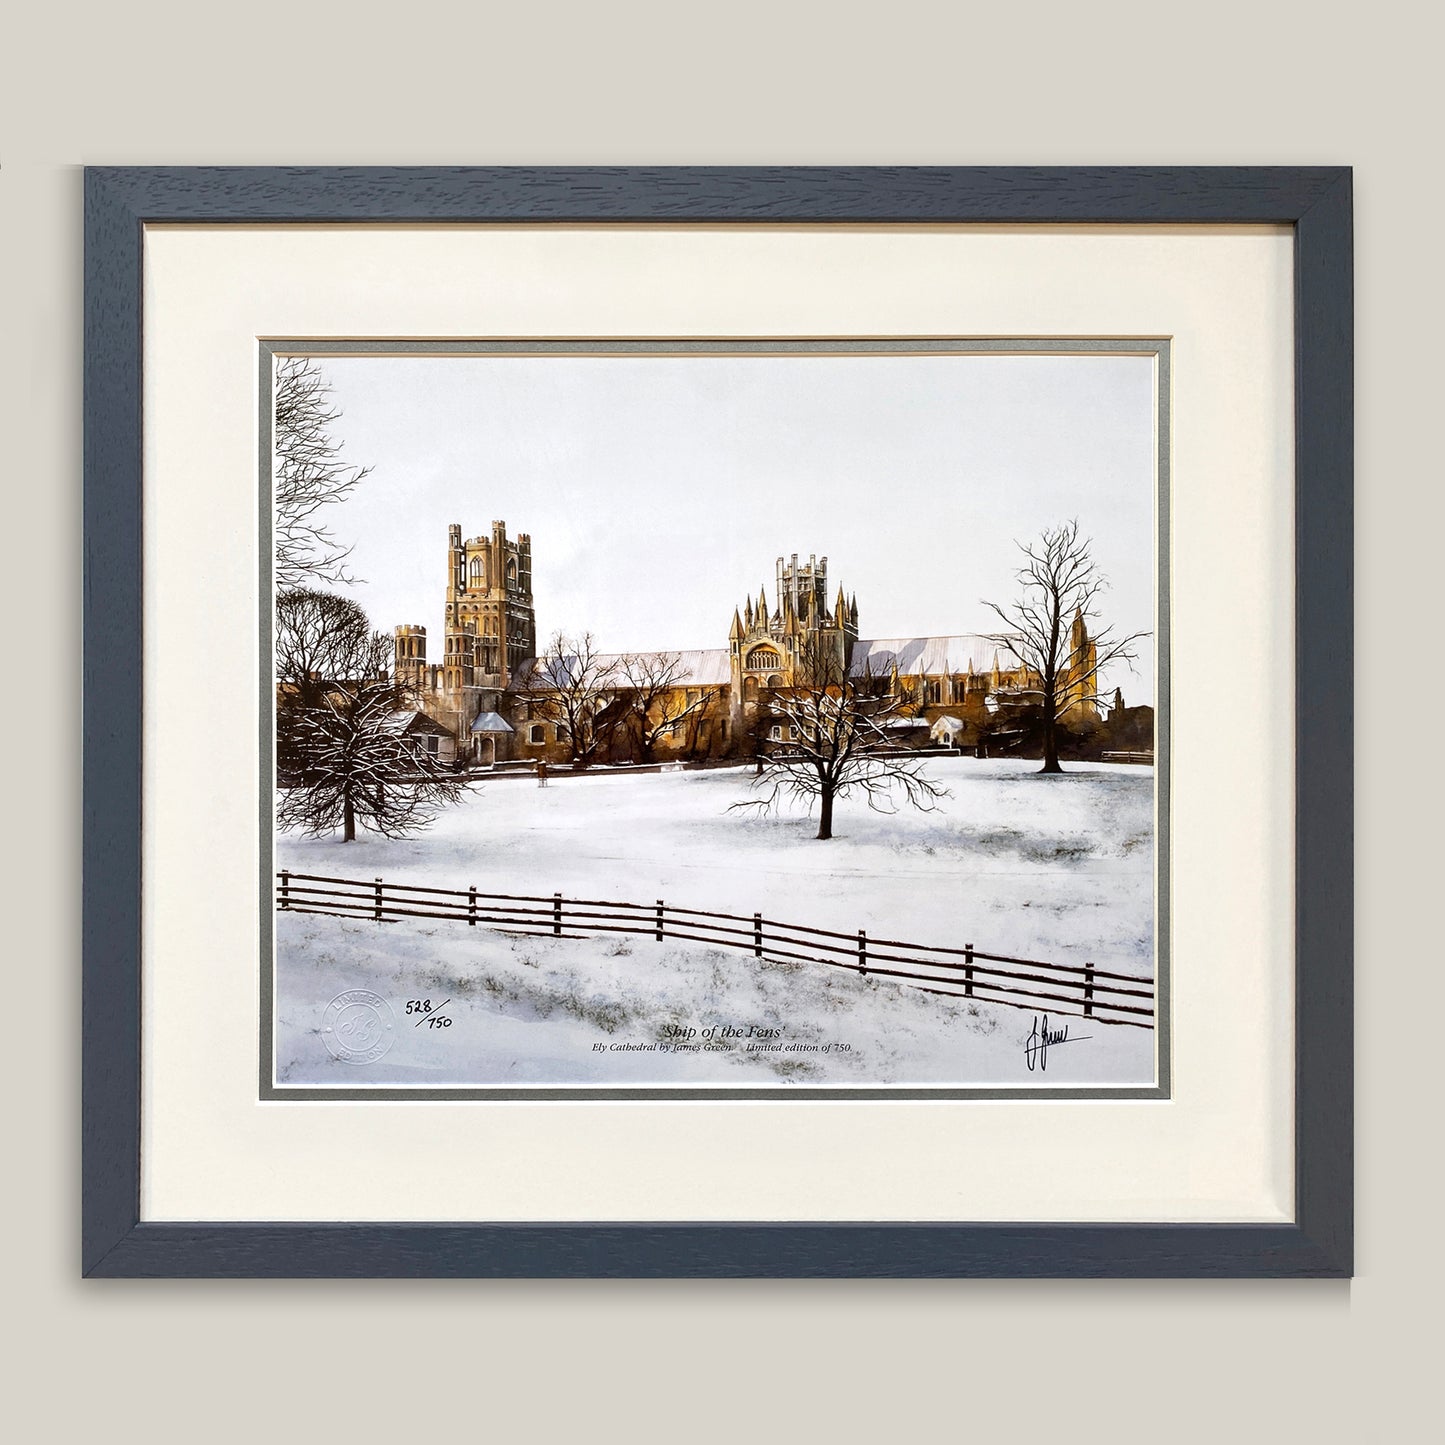 Ely Cathedral 'Ship of the Fens' Limited Edition Print